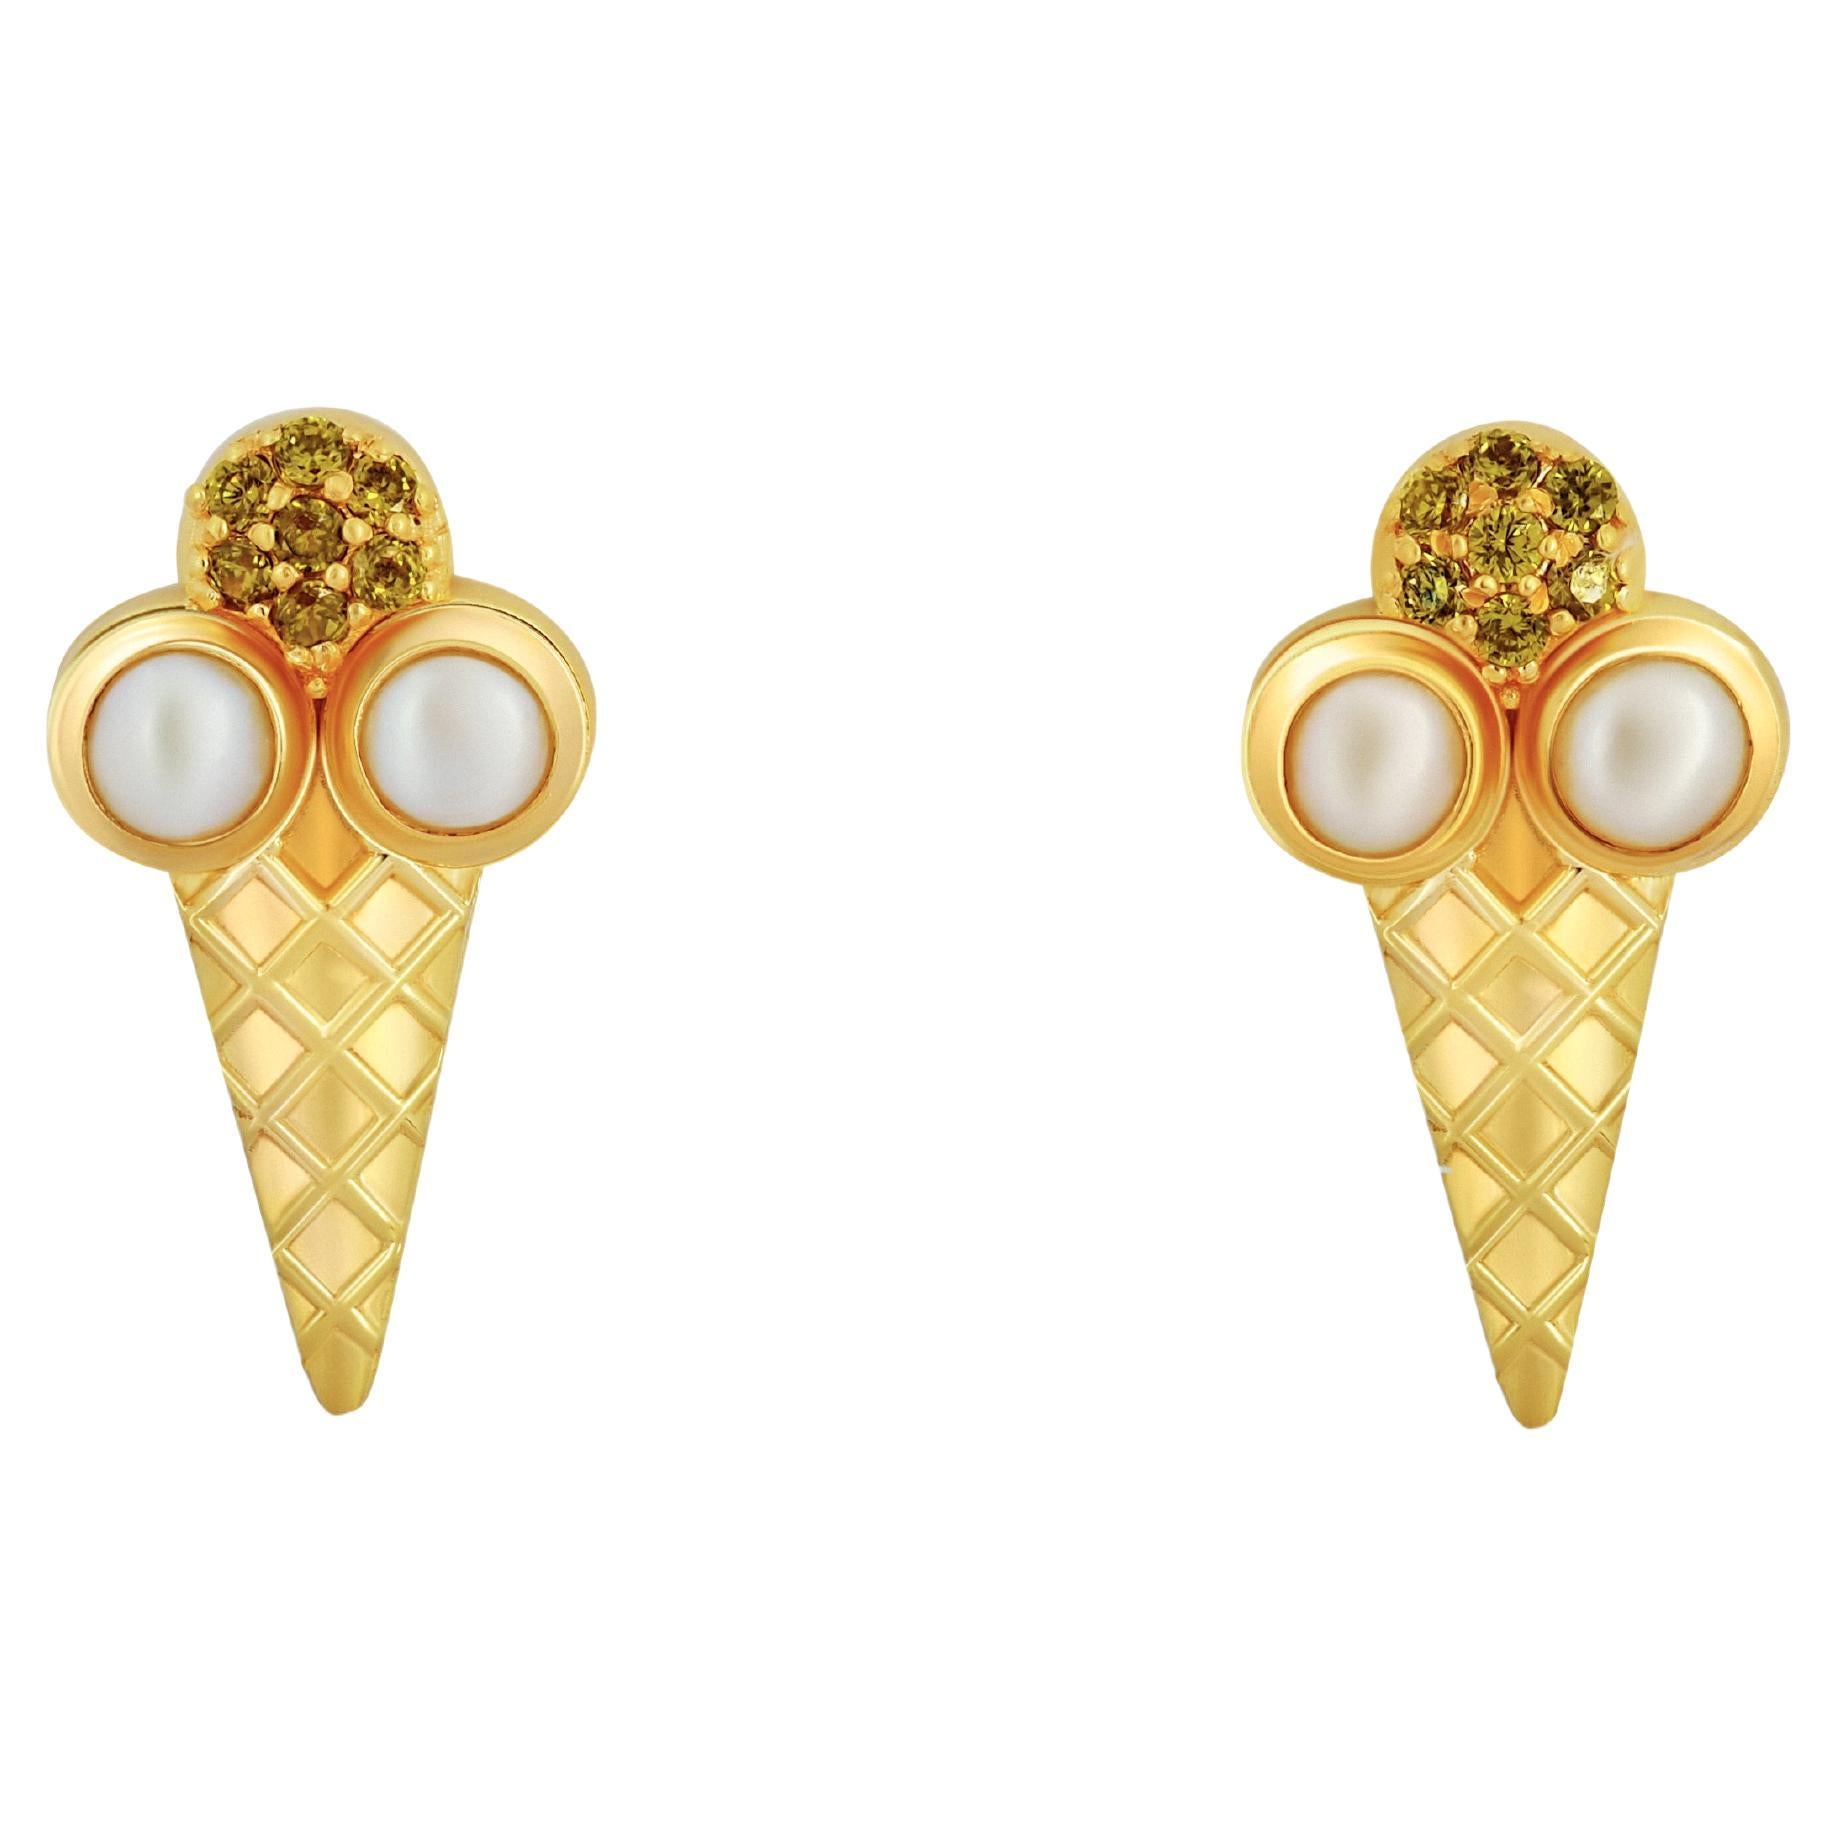 Ice cream funny earrings studs with peridots and pearls in 14k gold